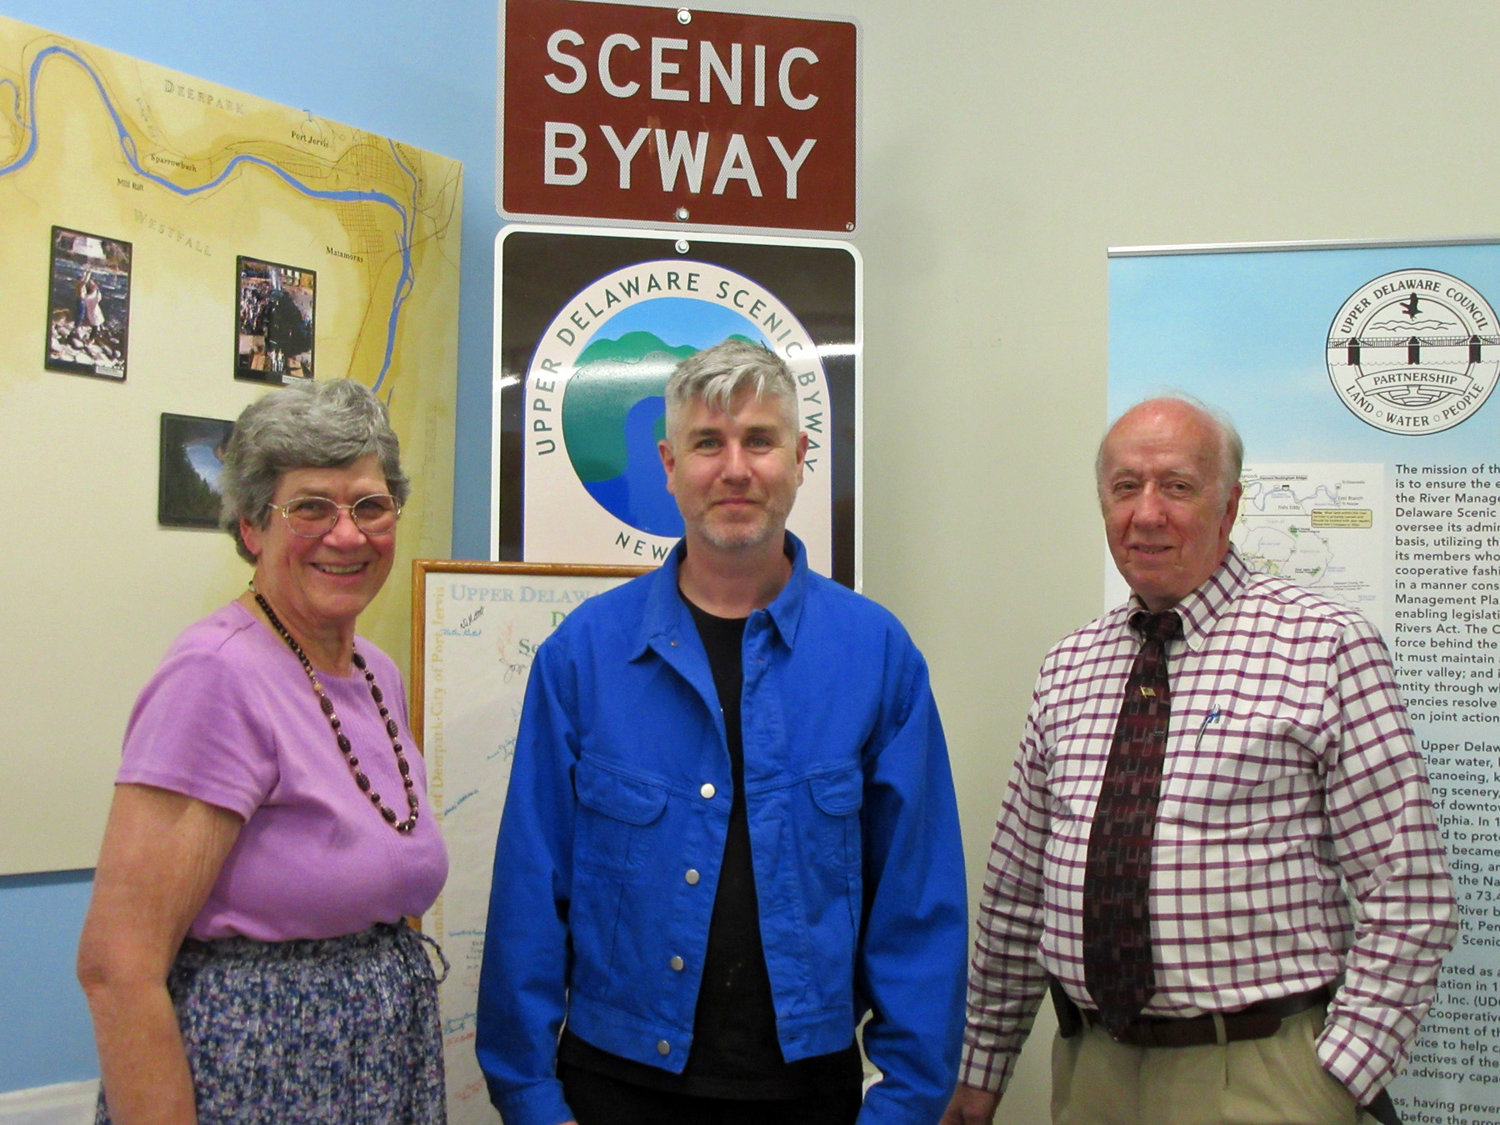 Virginia "Ginny" Dudko (left), John Pizzolato and Larry H Richardson are serving as the vice-chairperson, chairperson and secretary-treasurer respectively for the Upper Delaware Scenic Byway.